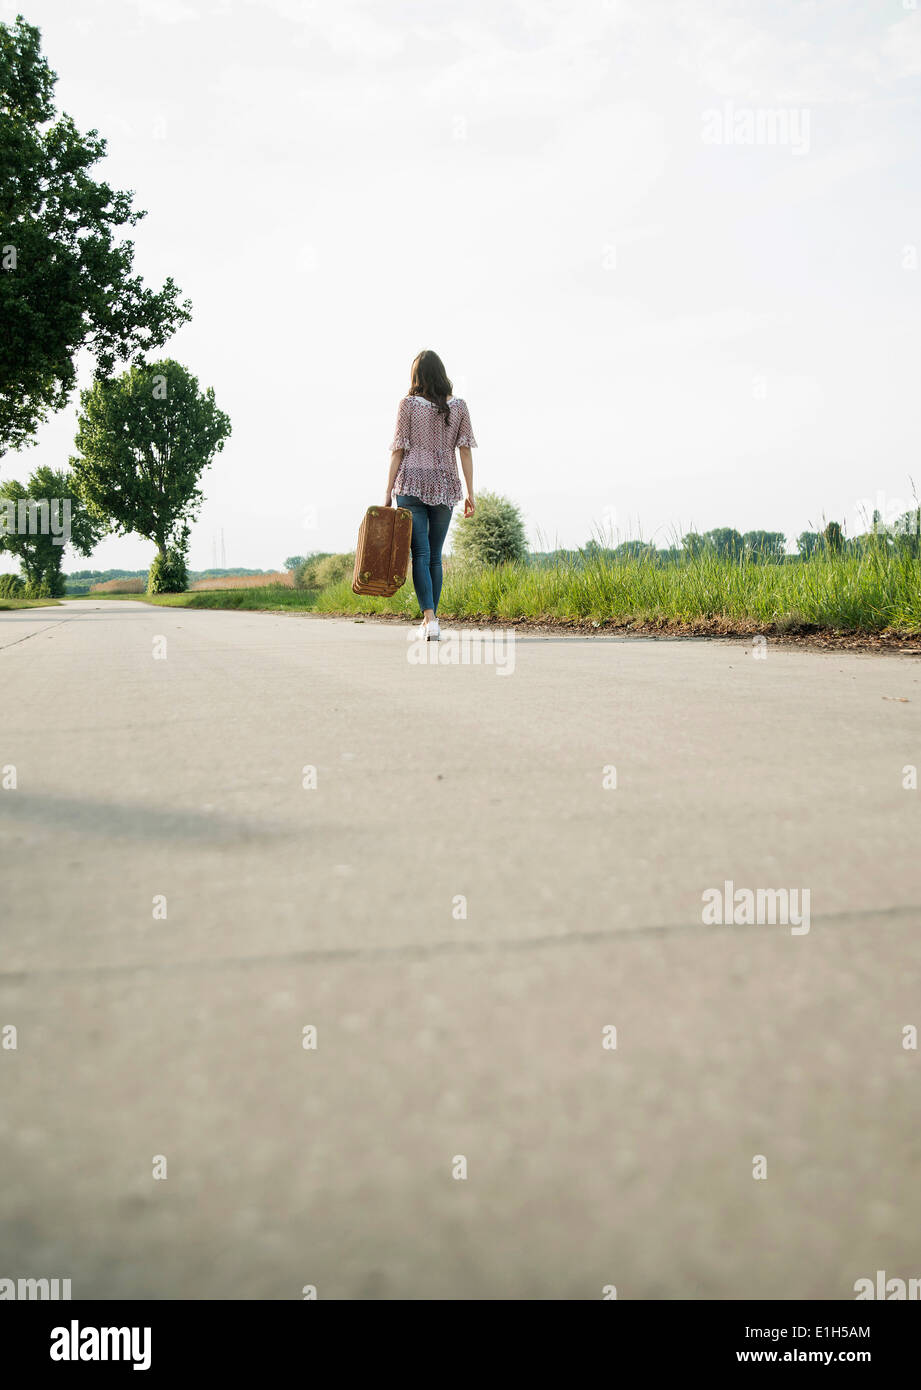 Young woman walking on country road réalisation suitcase Banque D'Images